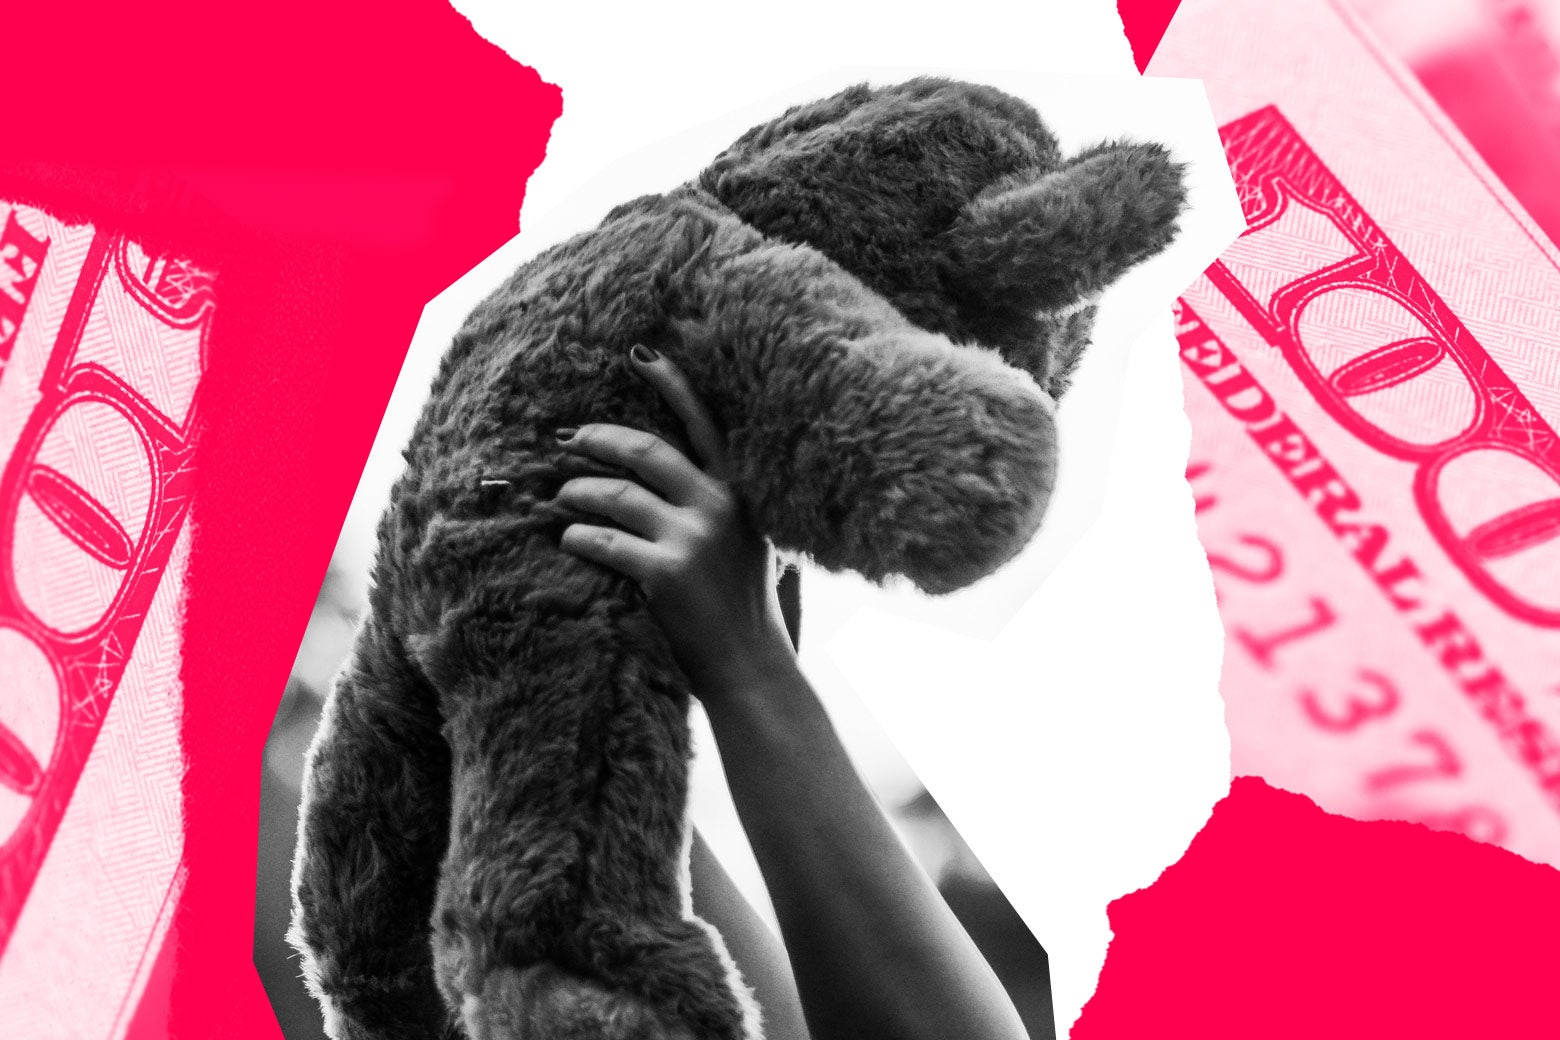 A teddy bear being held up by someone, bordered with collage of money.